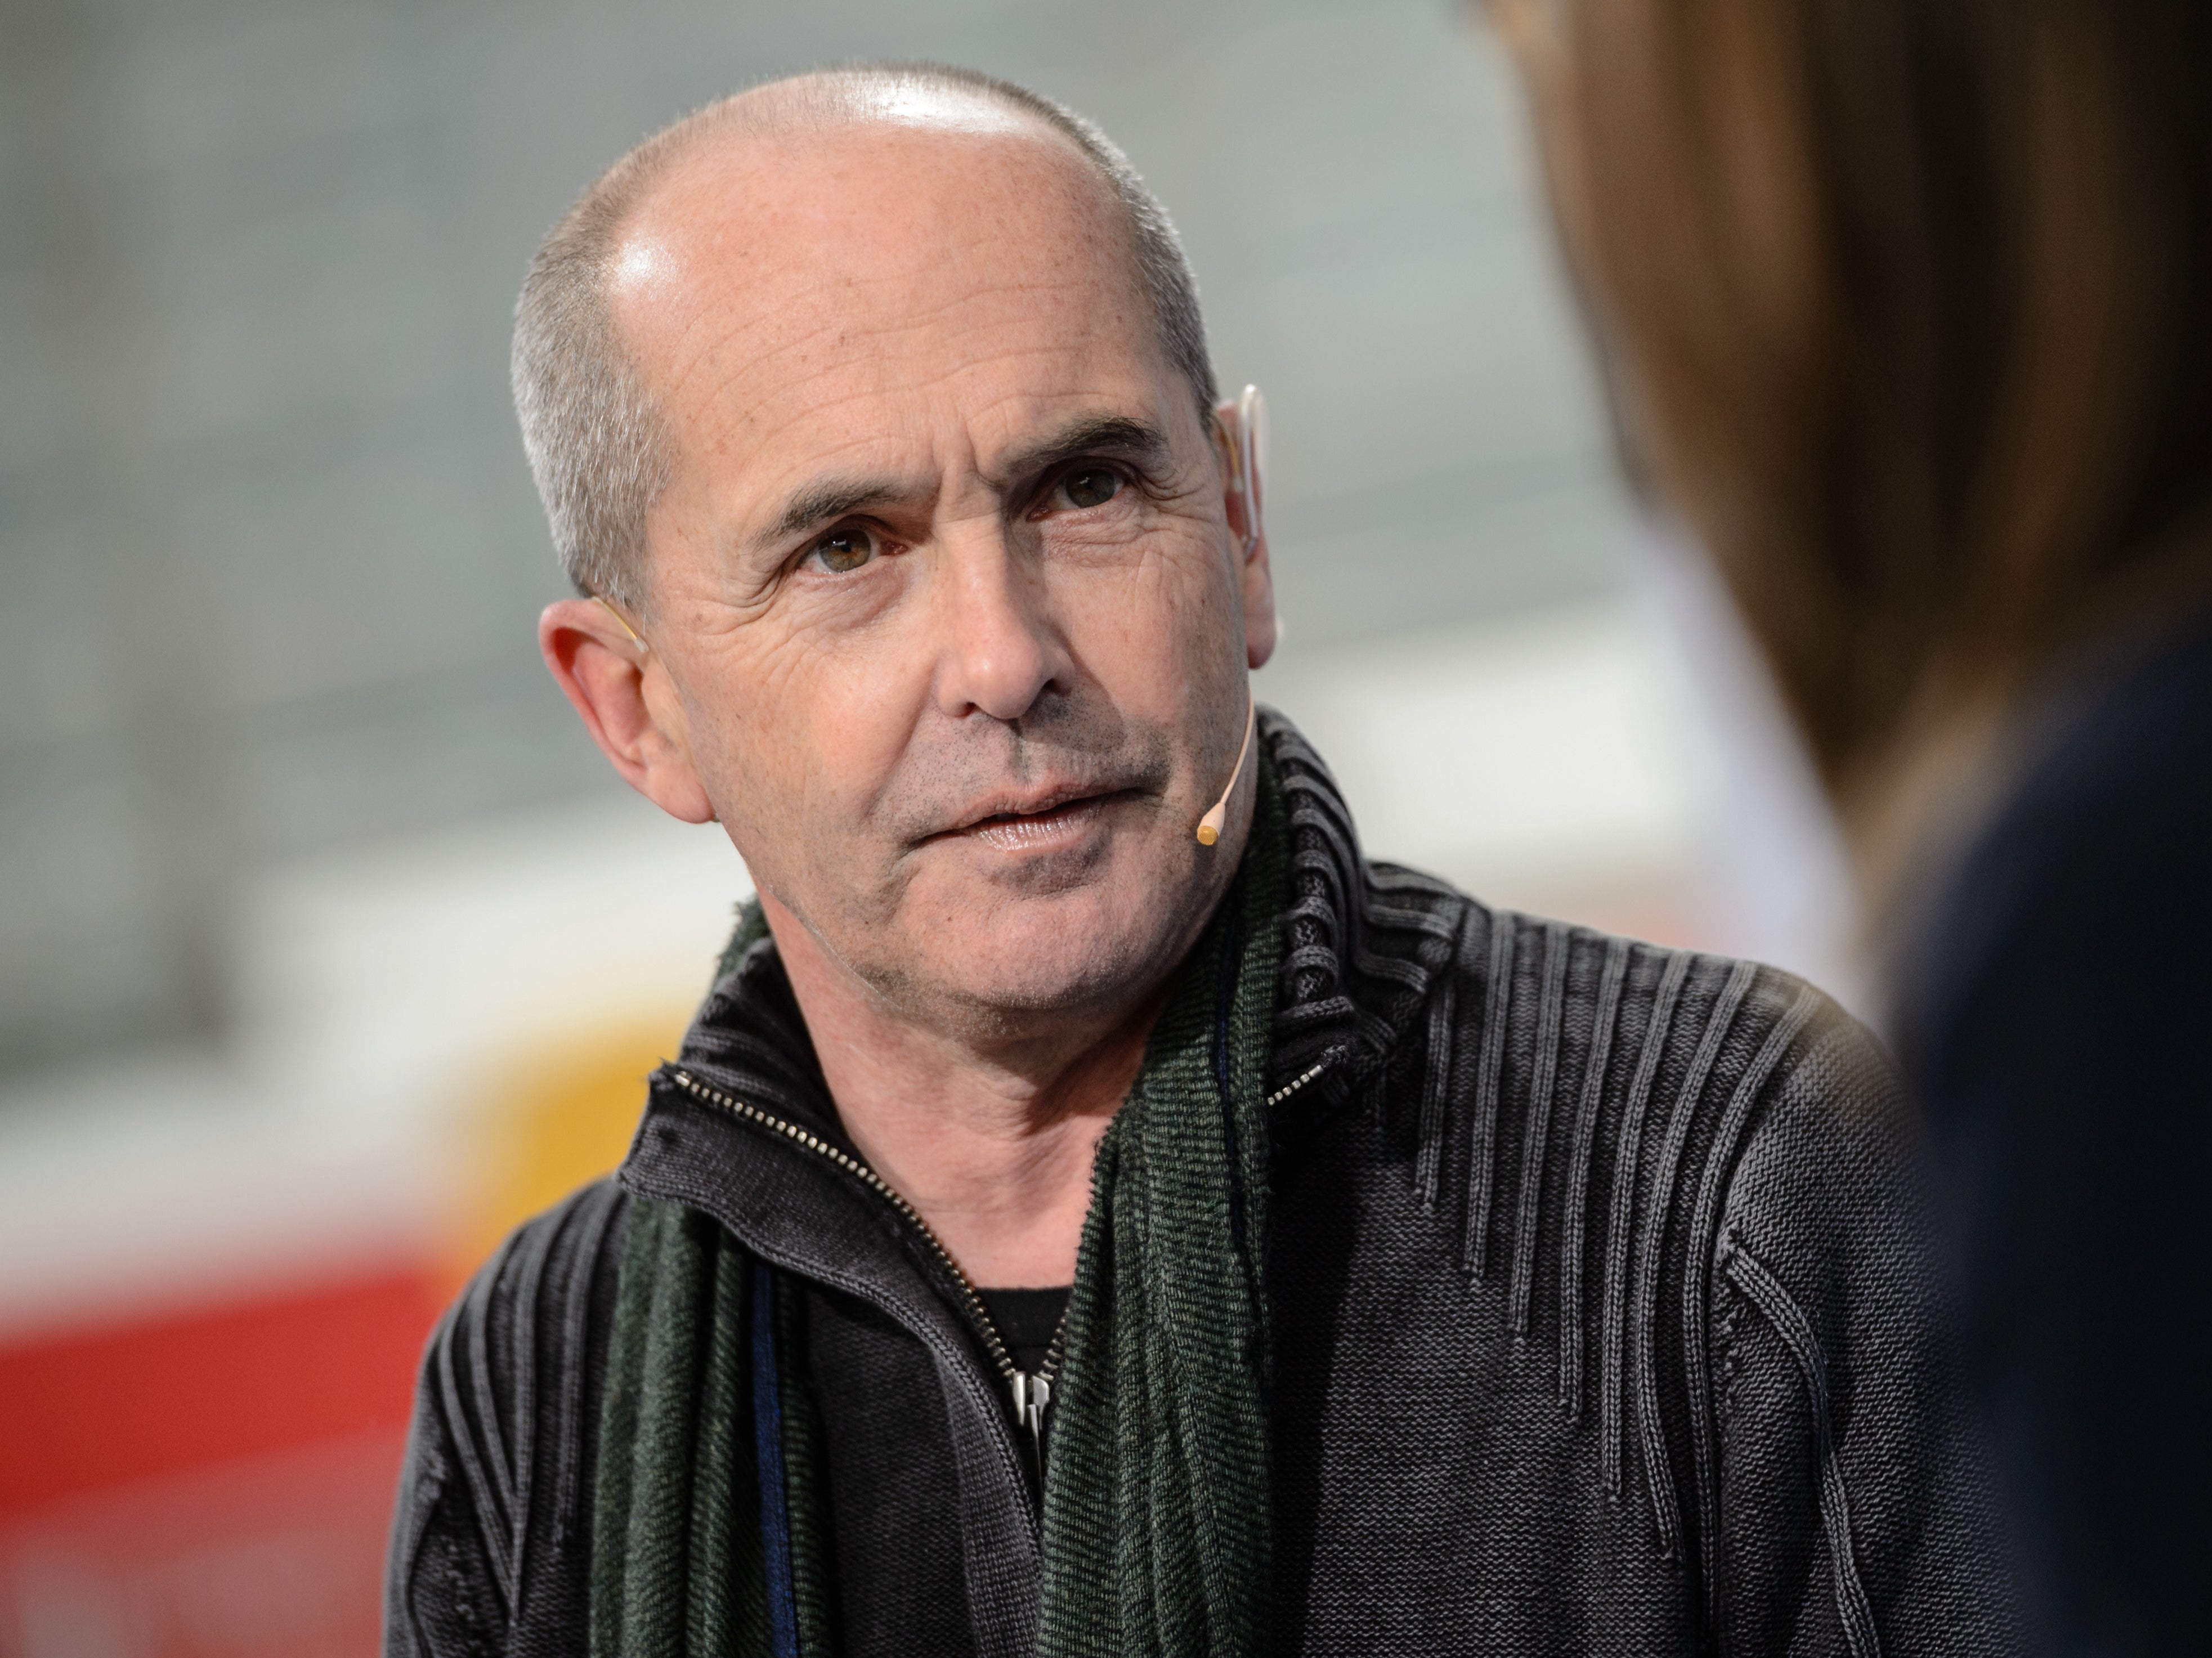 American author Don Winslow is seen during the Leipzig Book Fair 2016 on 18 March 2016 in Leipzig, Germany